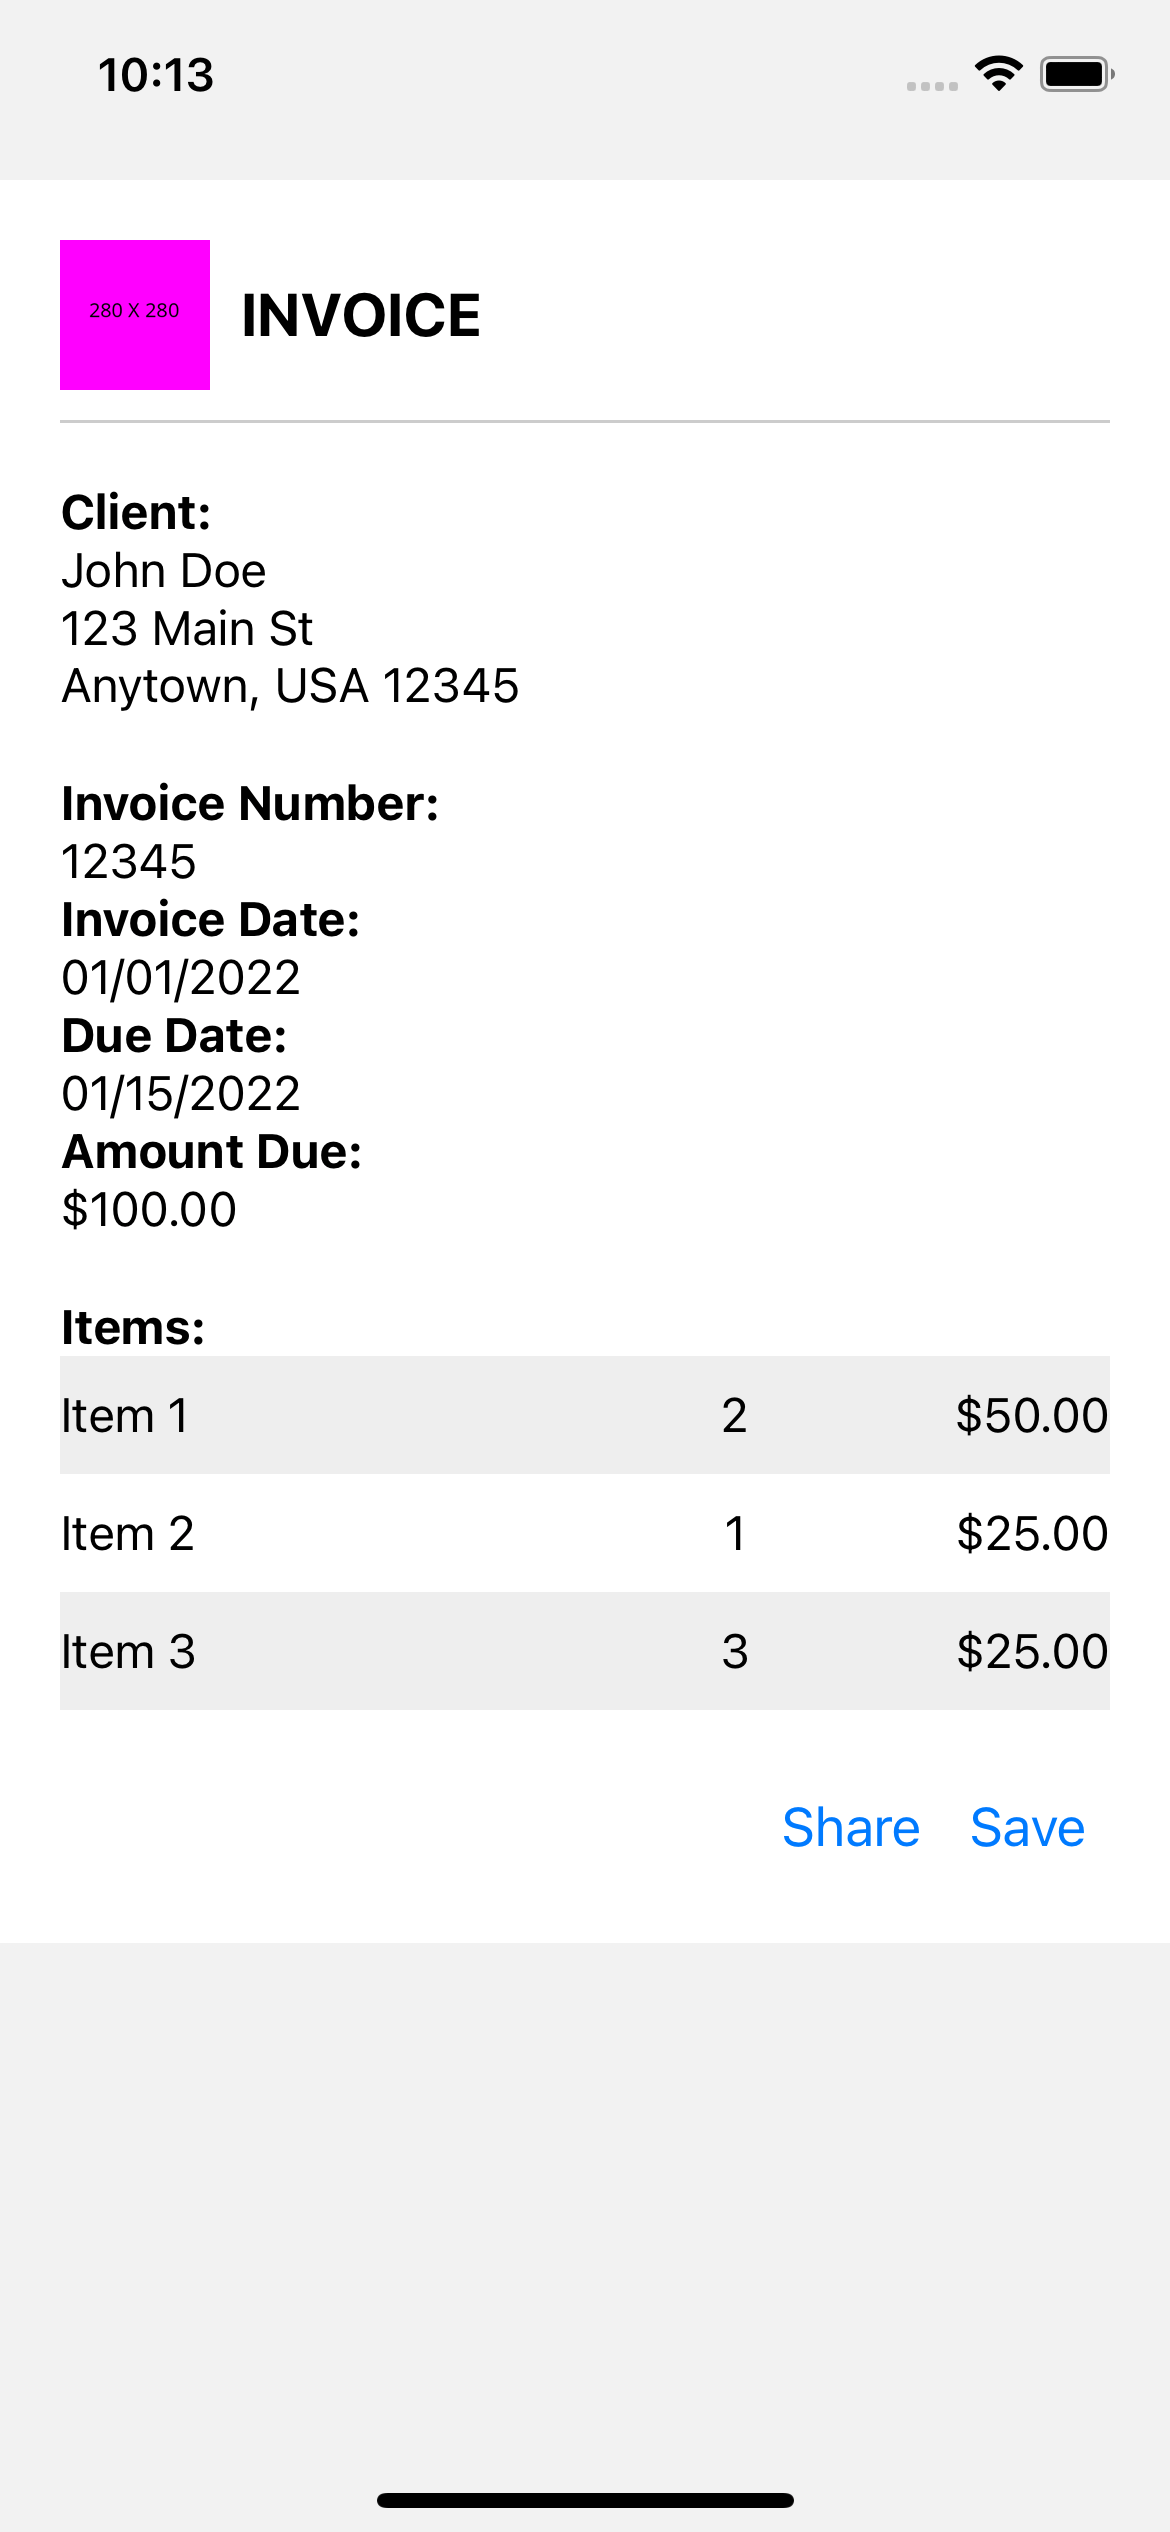 react native UI example. Invoice with logo and styled items